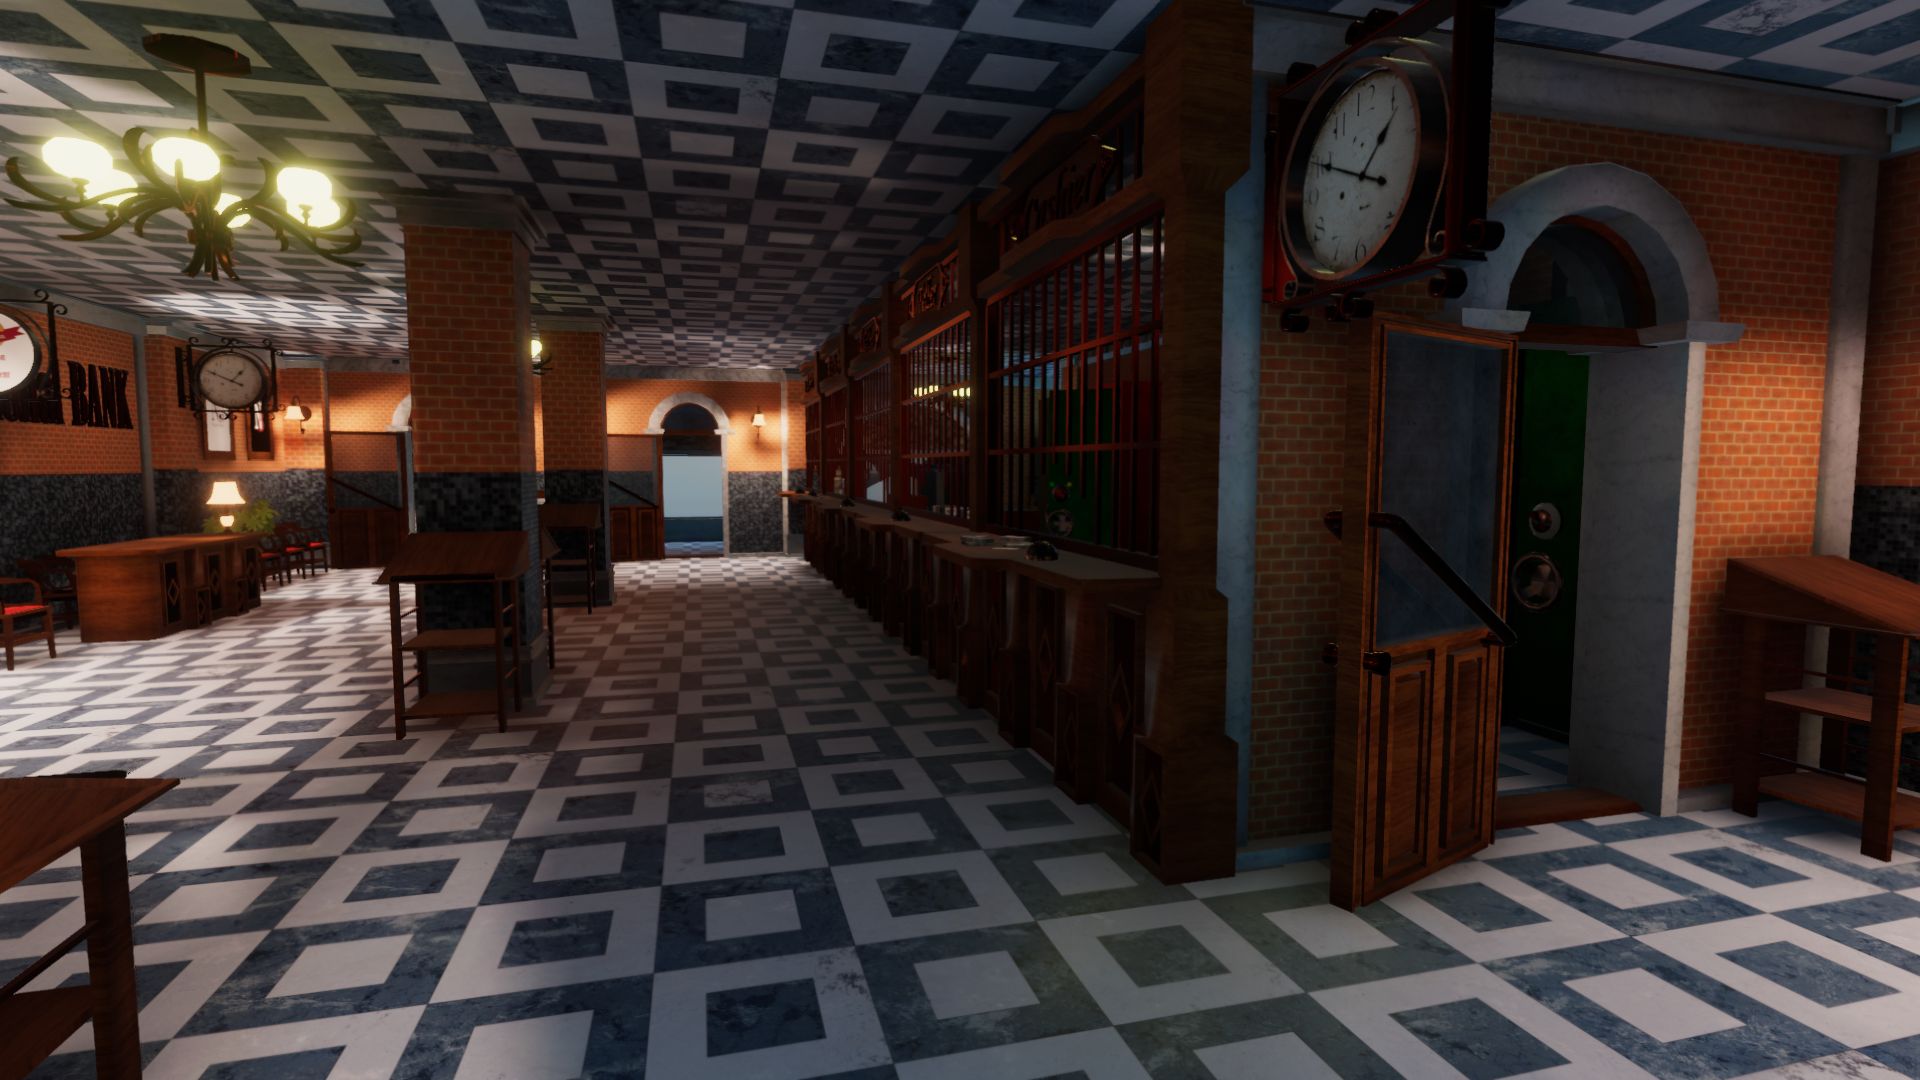 An image showing National Bank asset pack, created with Unity Engine.